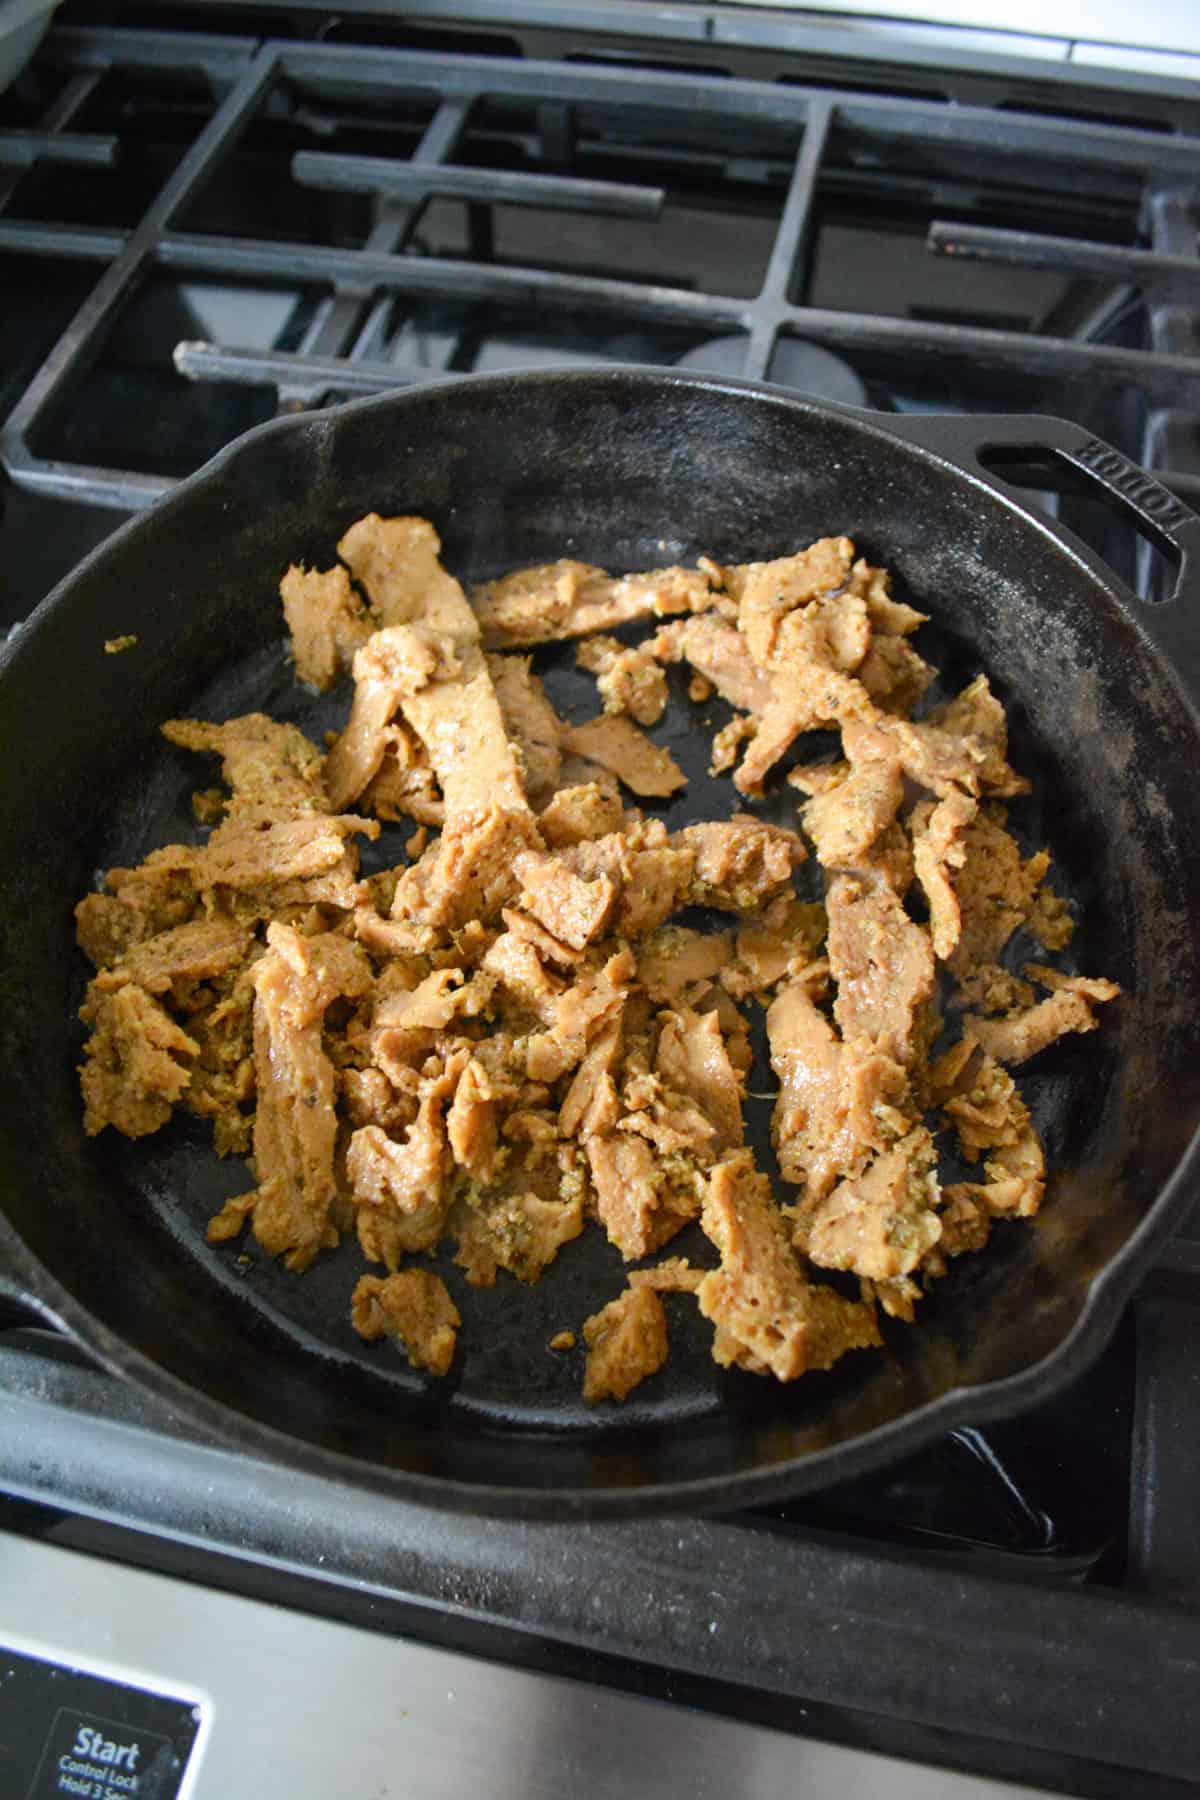 Seitan cooking in a cast iron skillet.